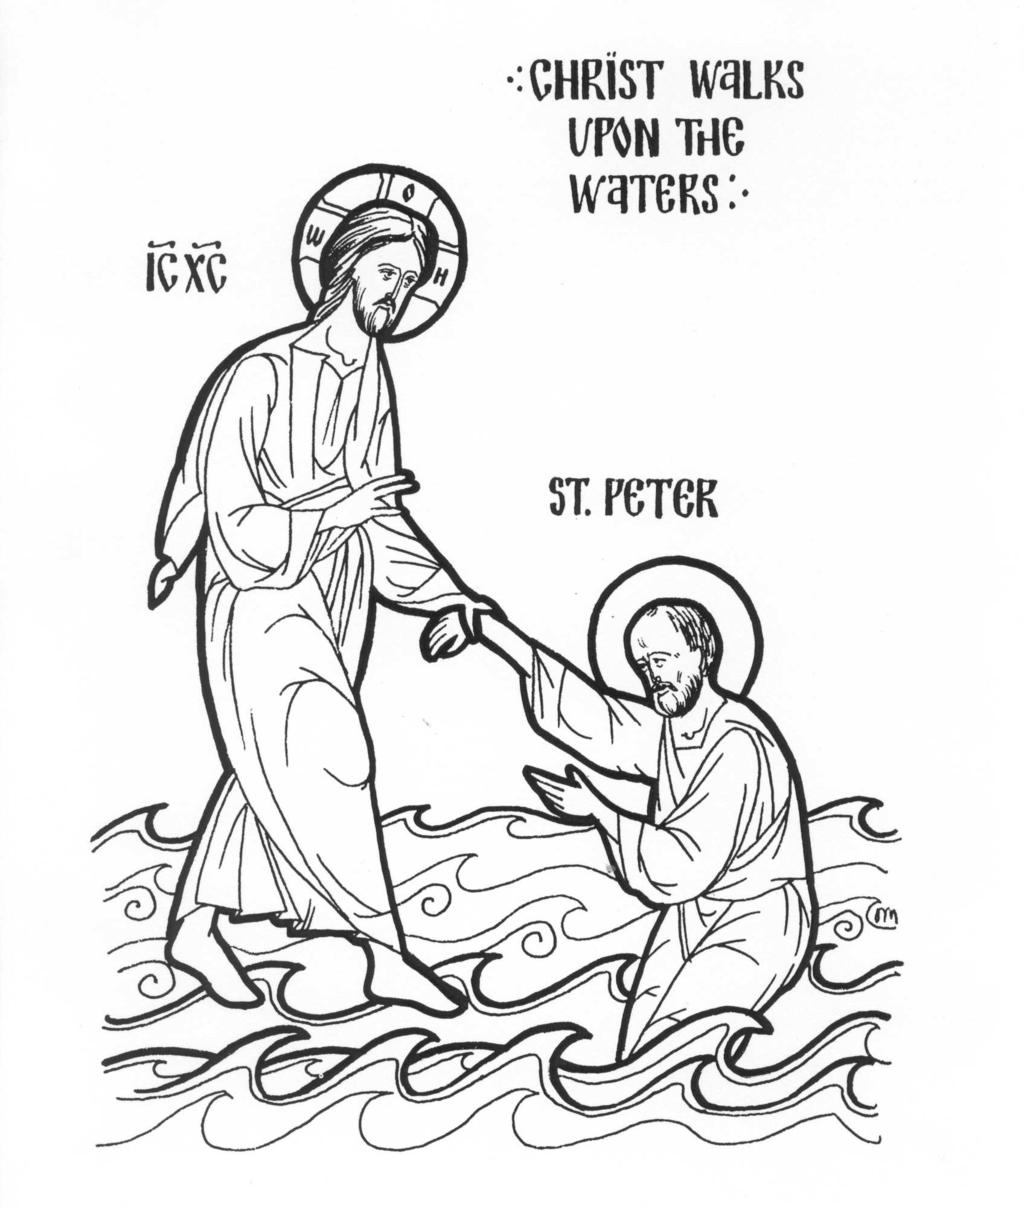 Coloring Sheet Icon courtesy of Iconographics (www.theologic.com) Let Us ttend! is published by the ntiochian Orthodox Department of Christian Education (www.antiochian.org).